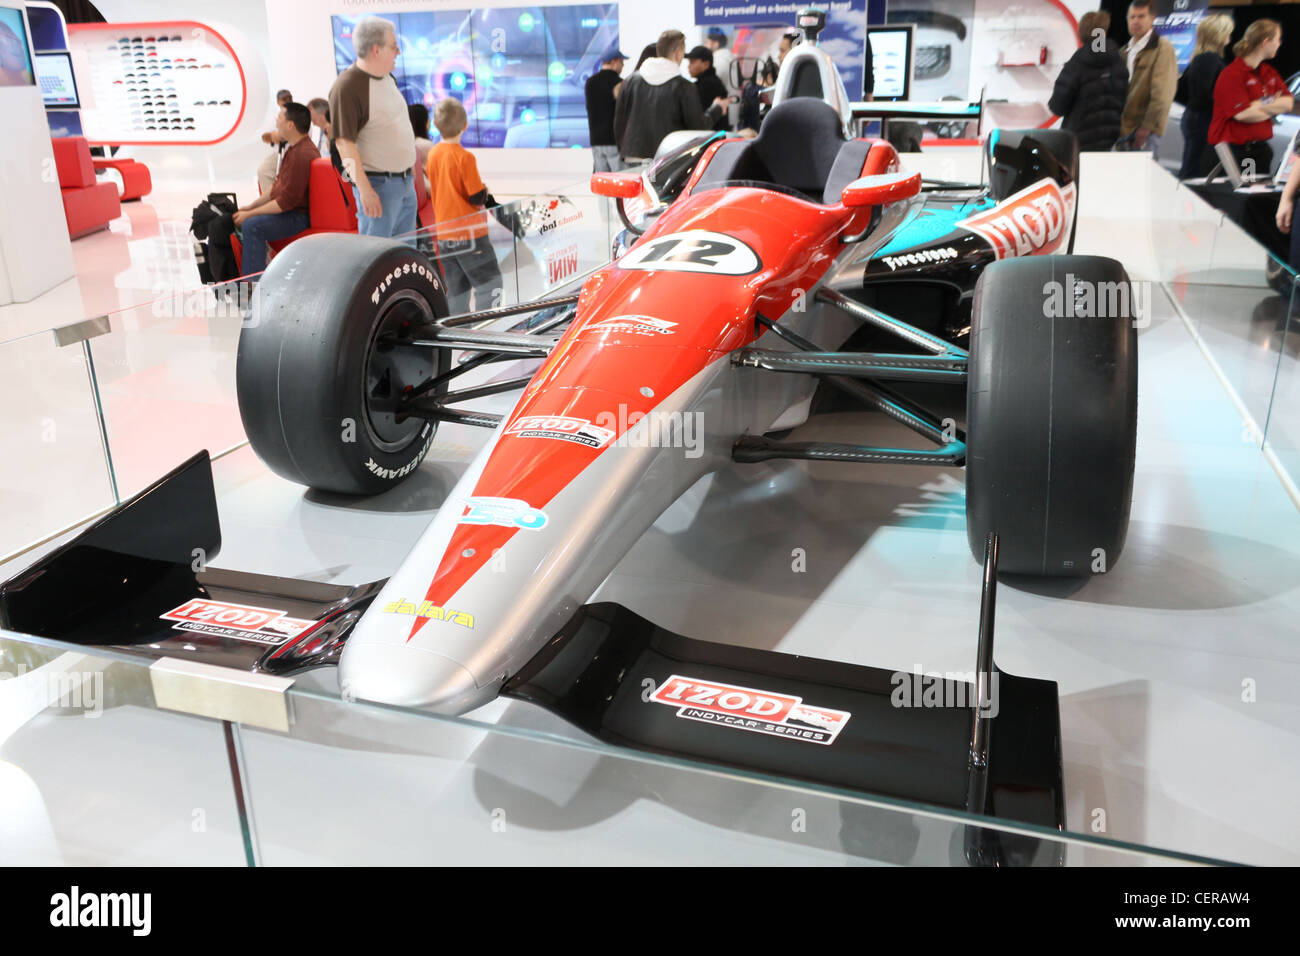 formula one f1 fast race racing sports car on display at a car show Stock Photo